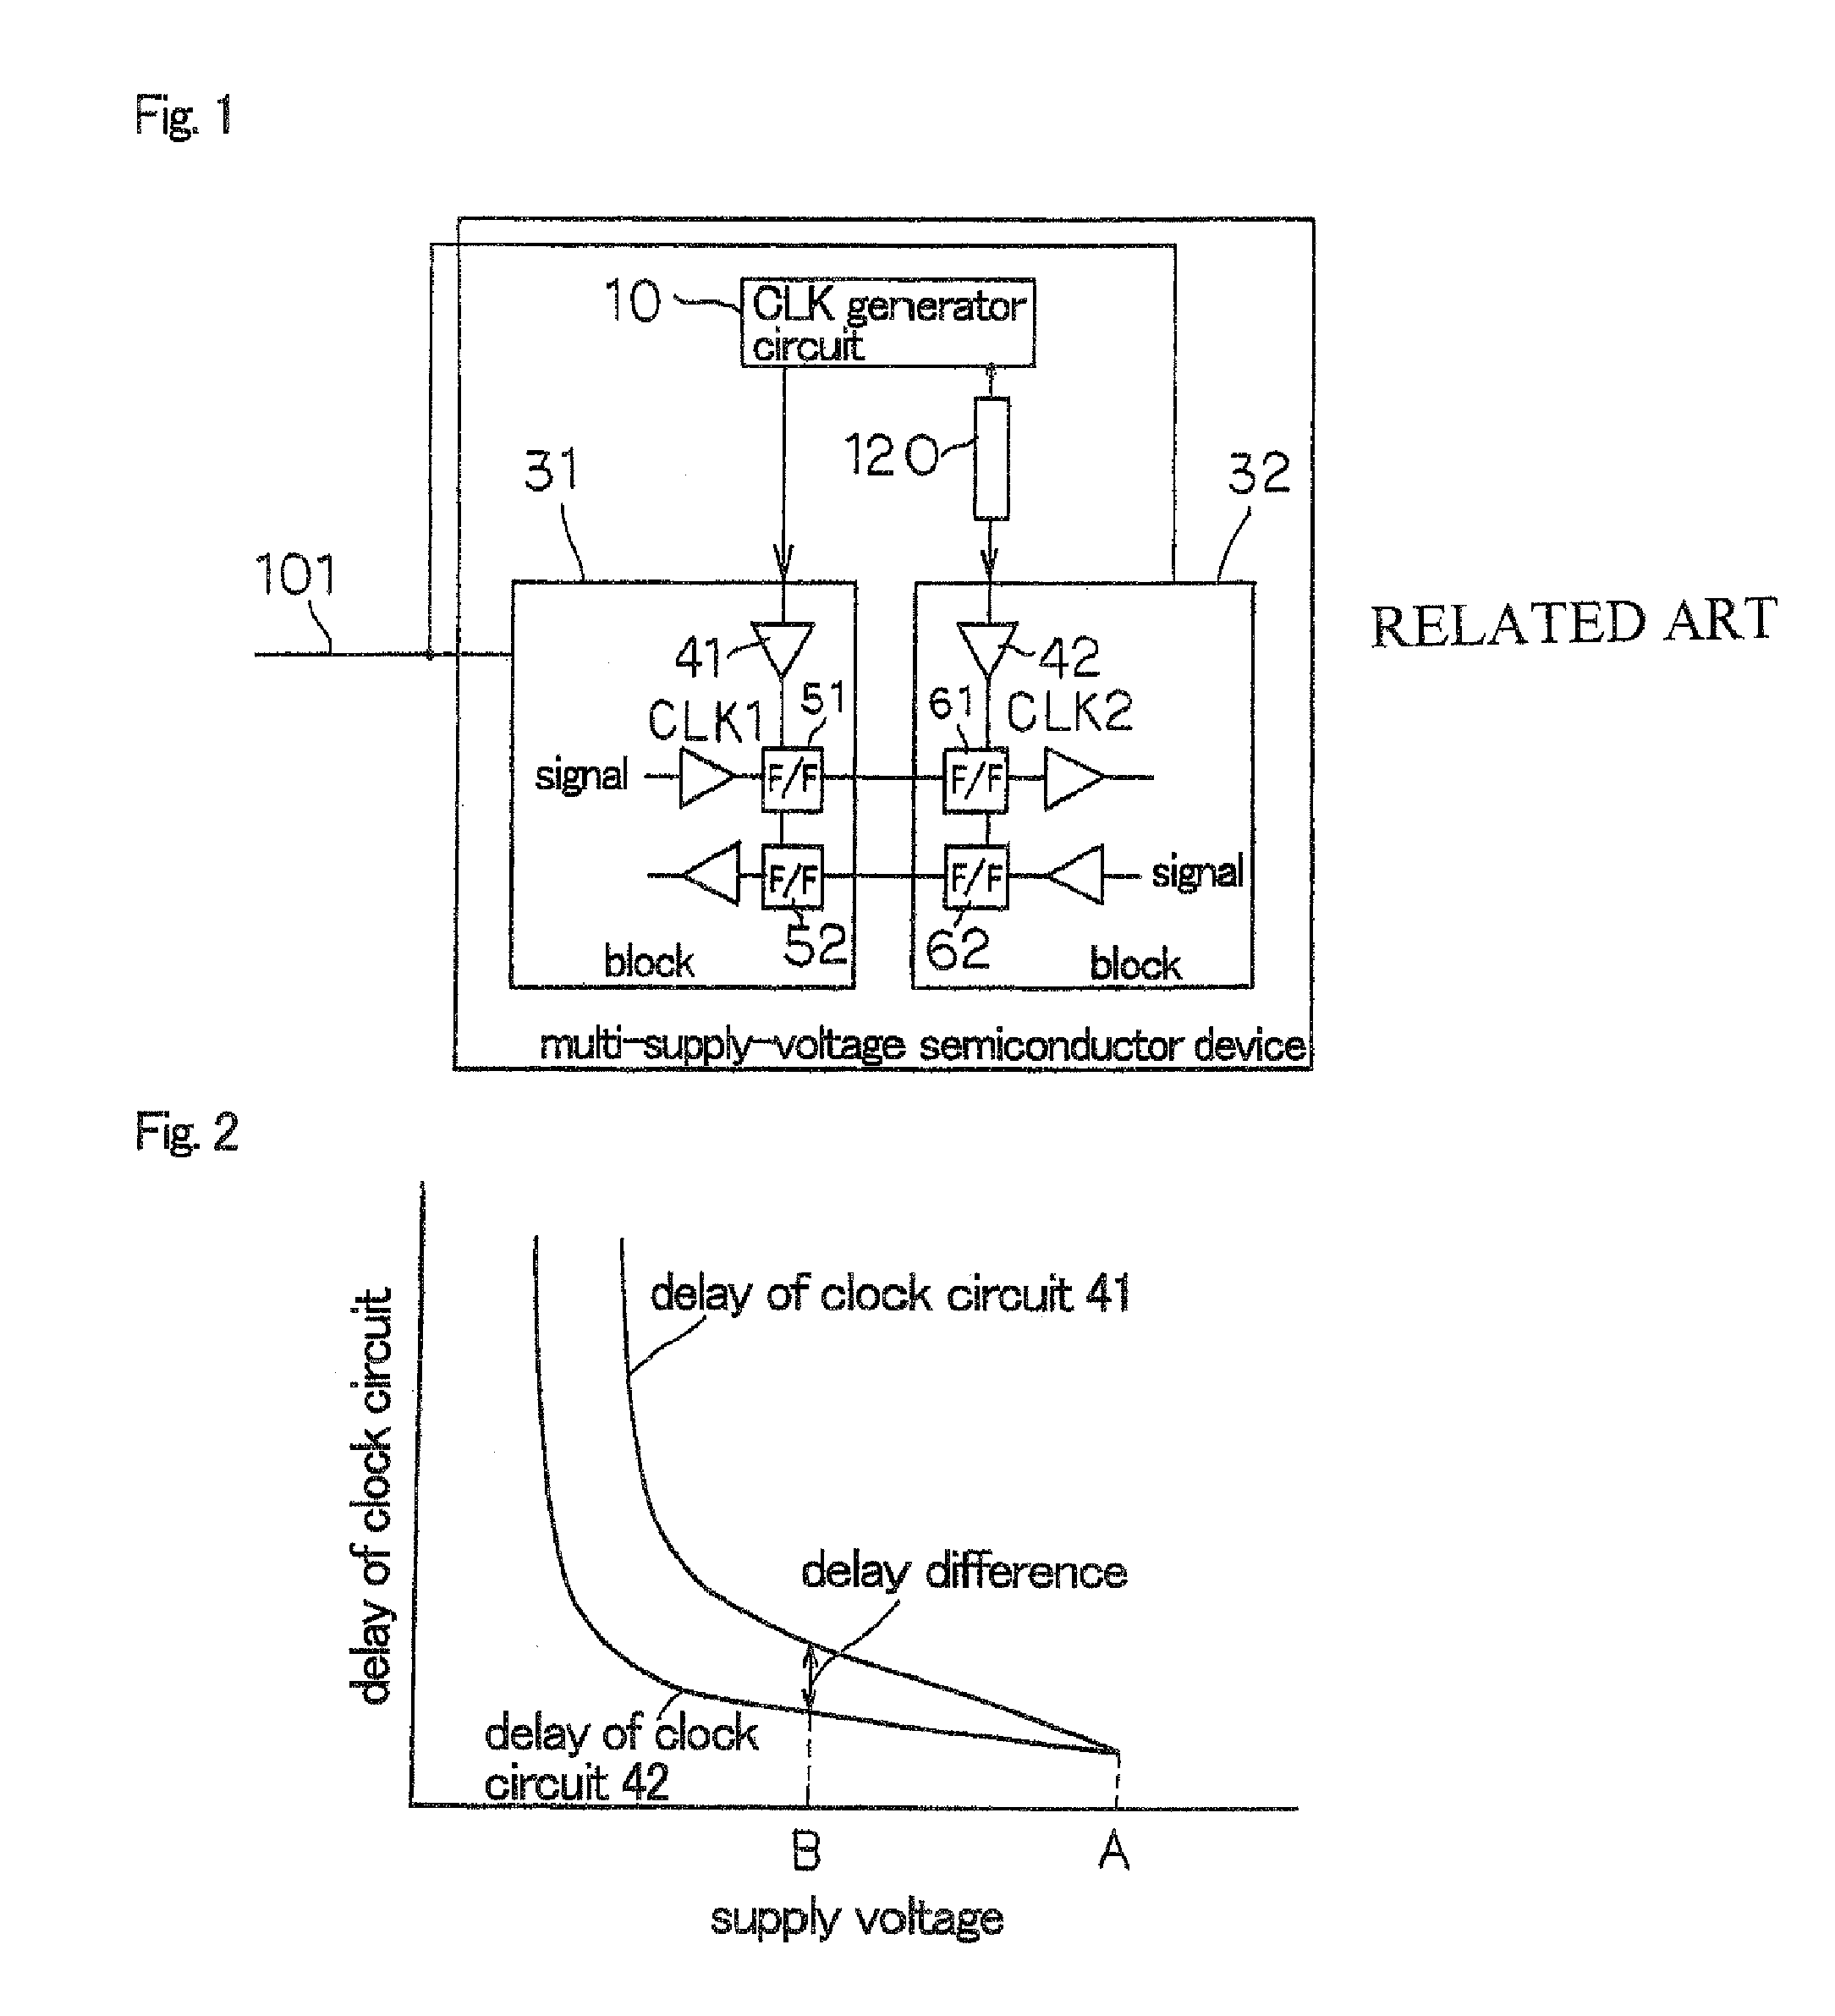 Multi-power source semiconductor device